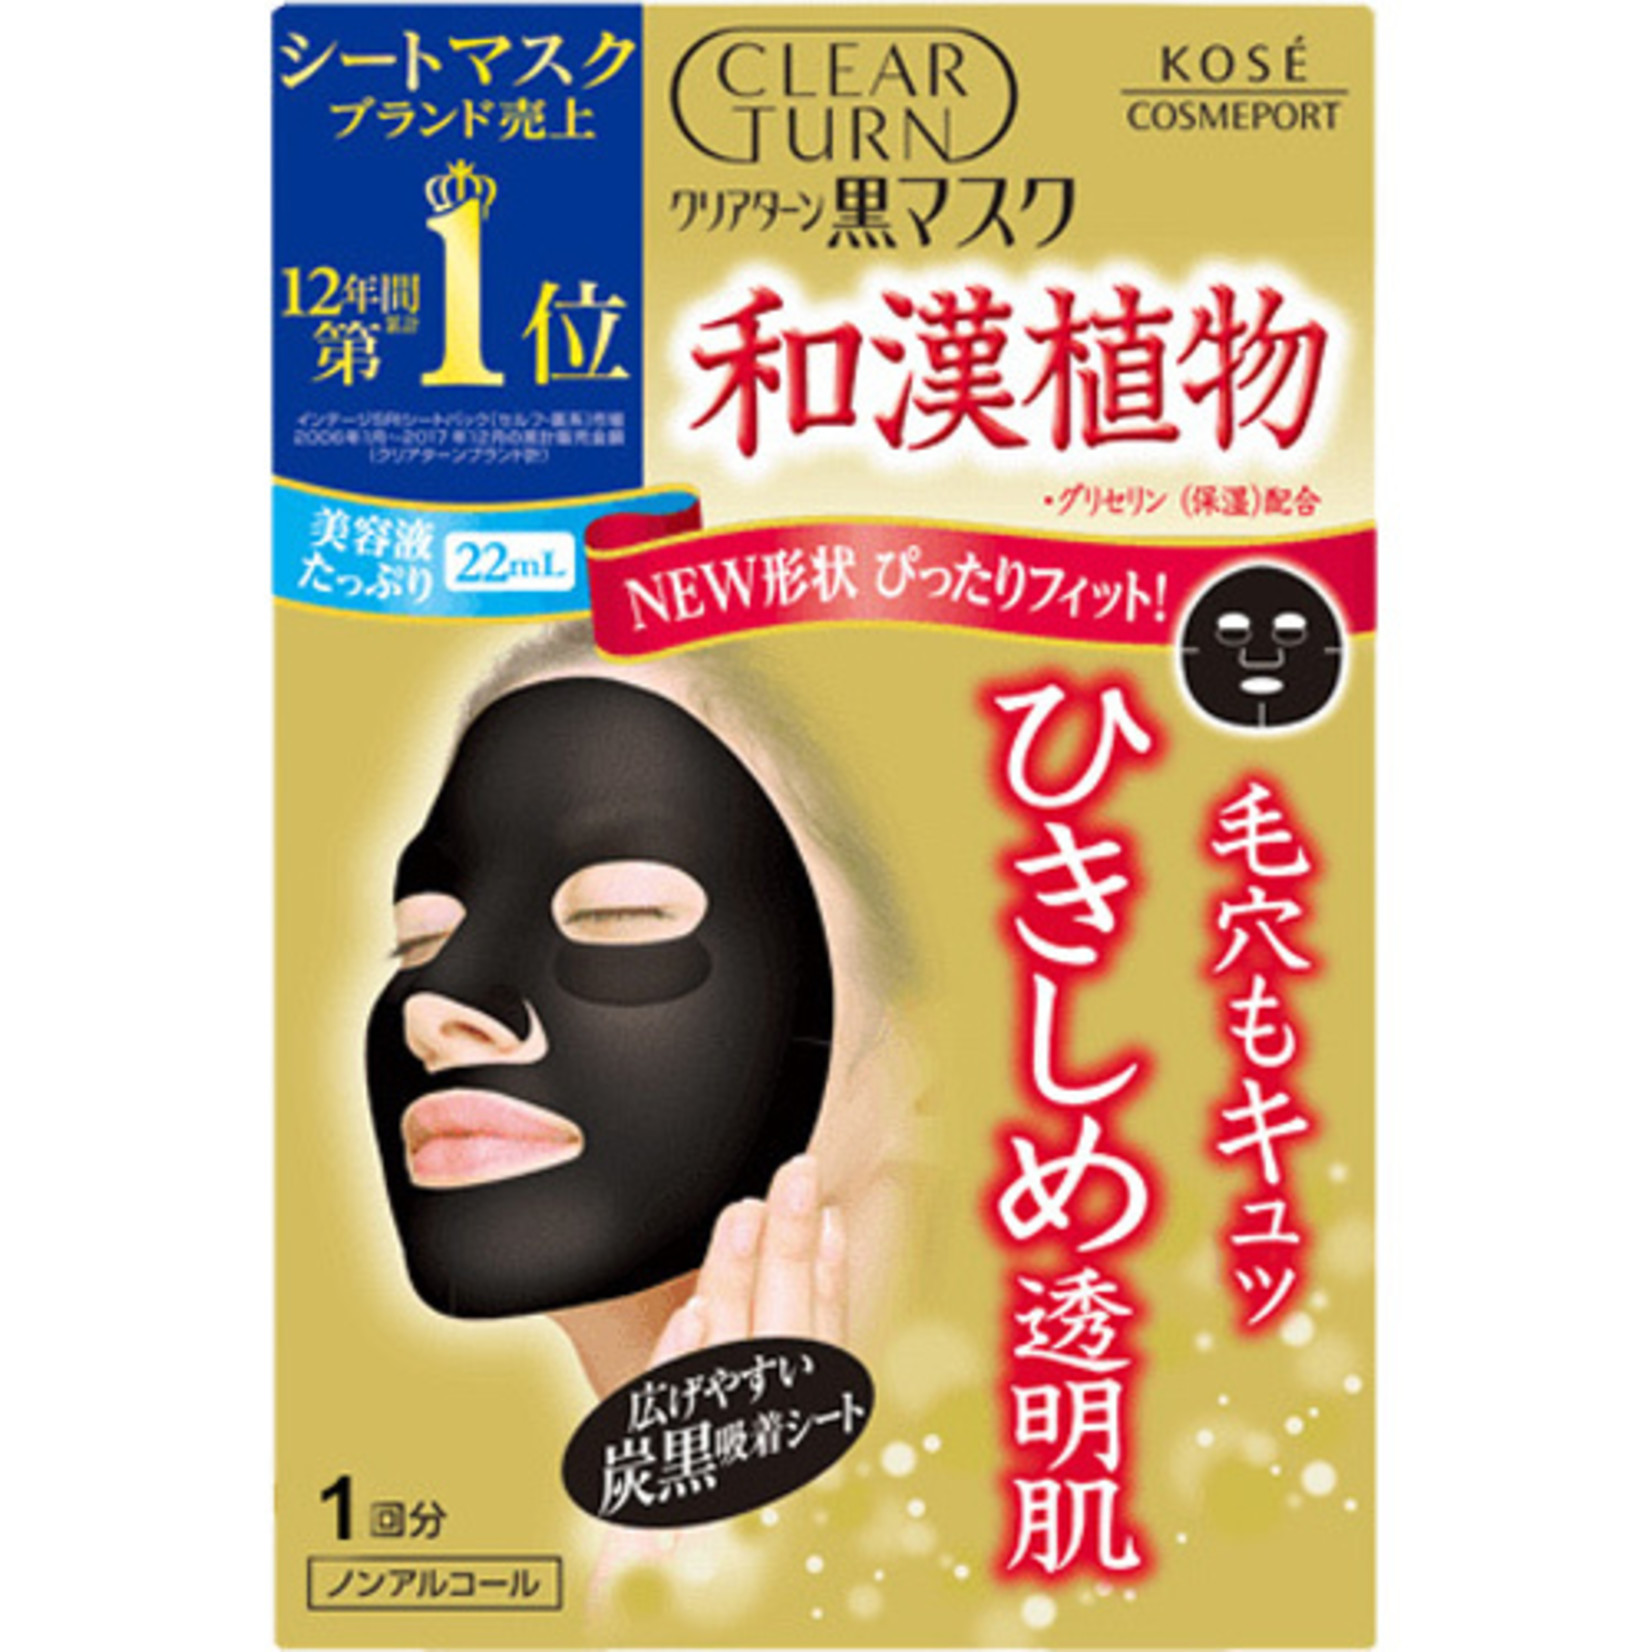 KOSE Clear Turn Herbal Extract Black Mask